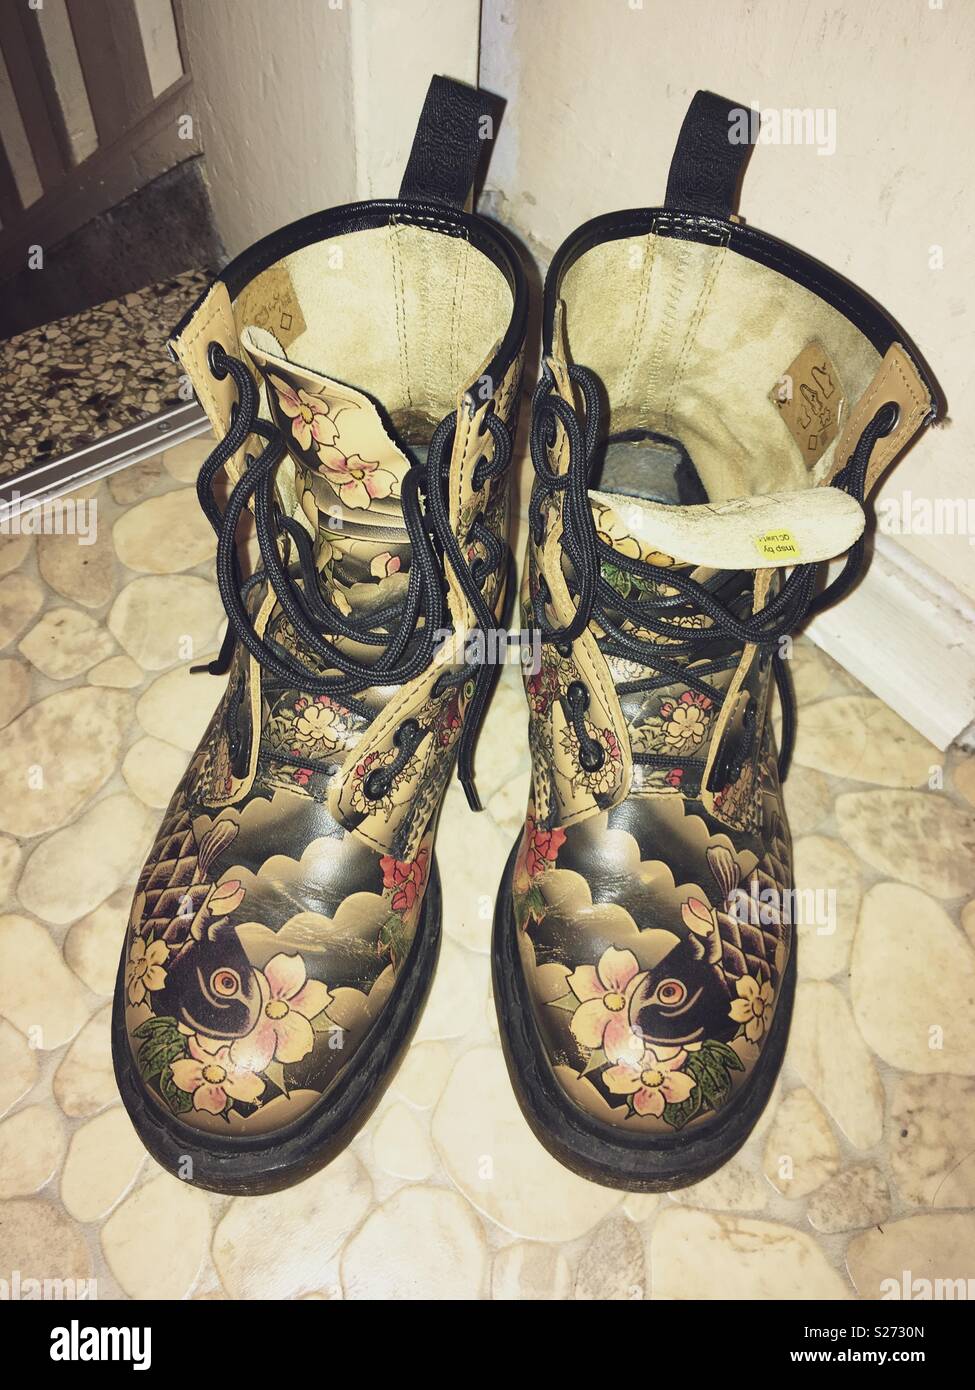 Dr. Martens boots with Japanese tattoo style print Stock Photo